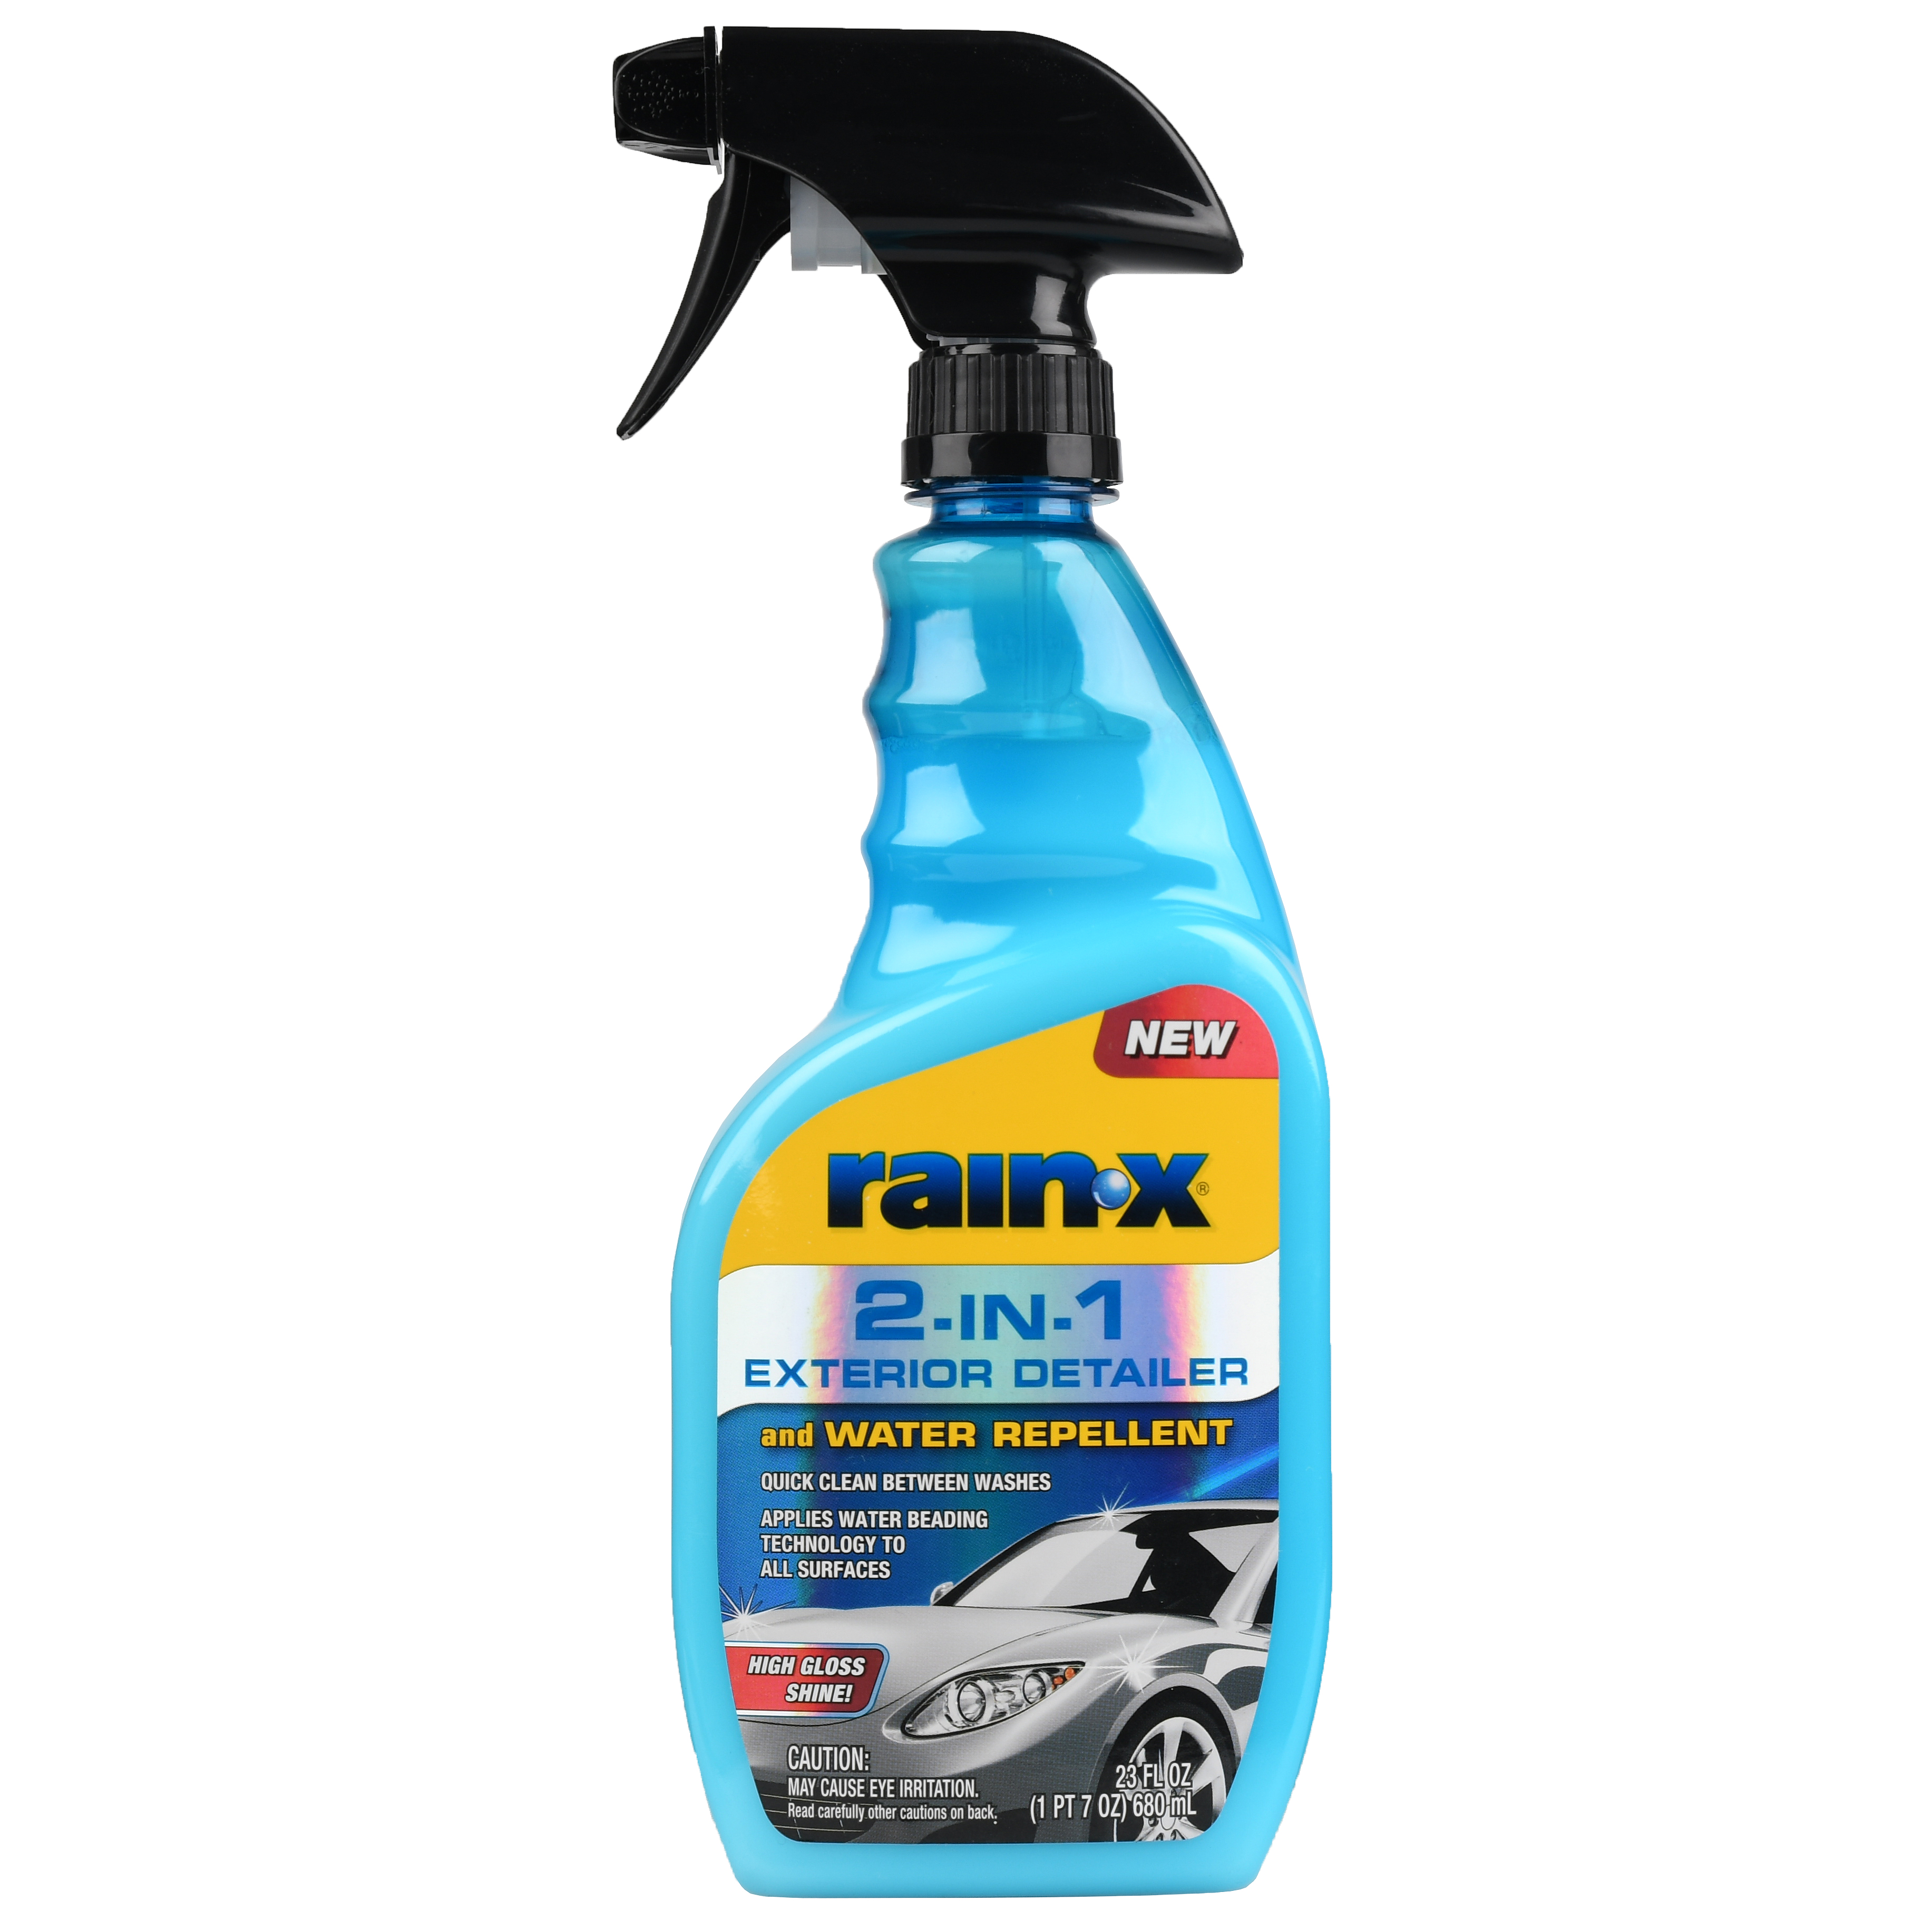 Ends soon! Rain X cleaning products for $0 after rebate